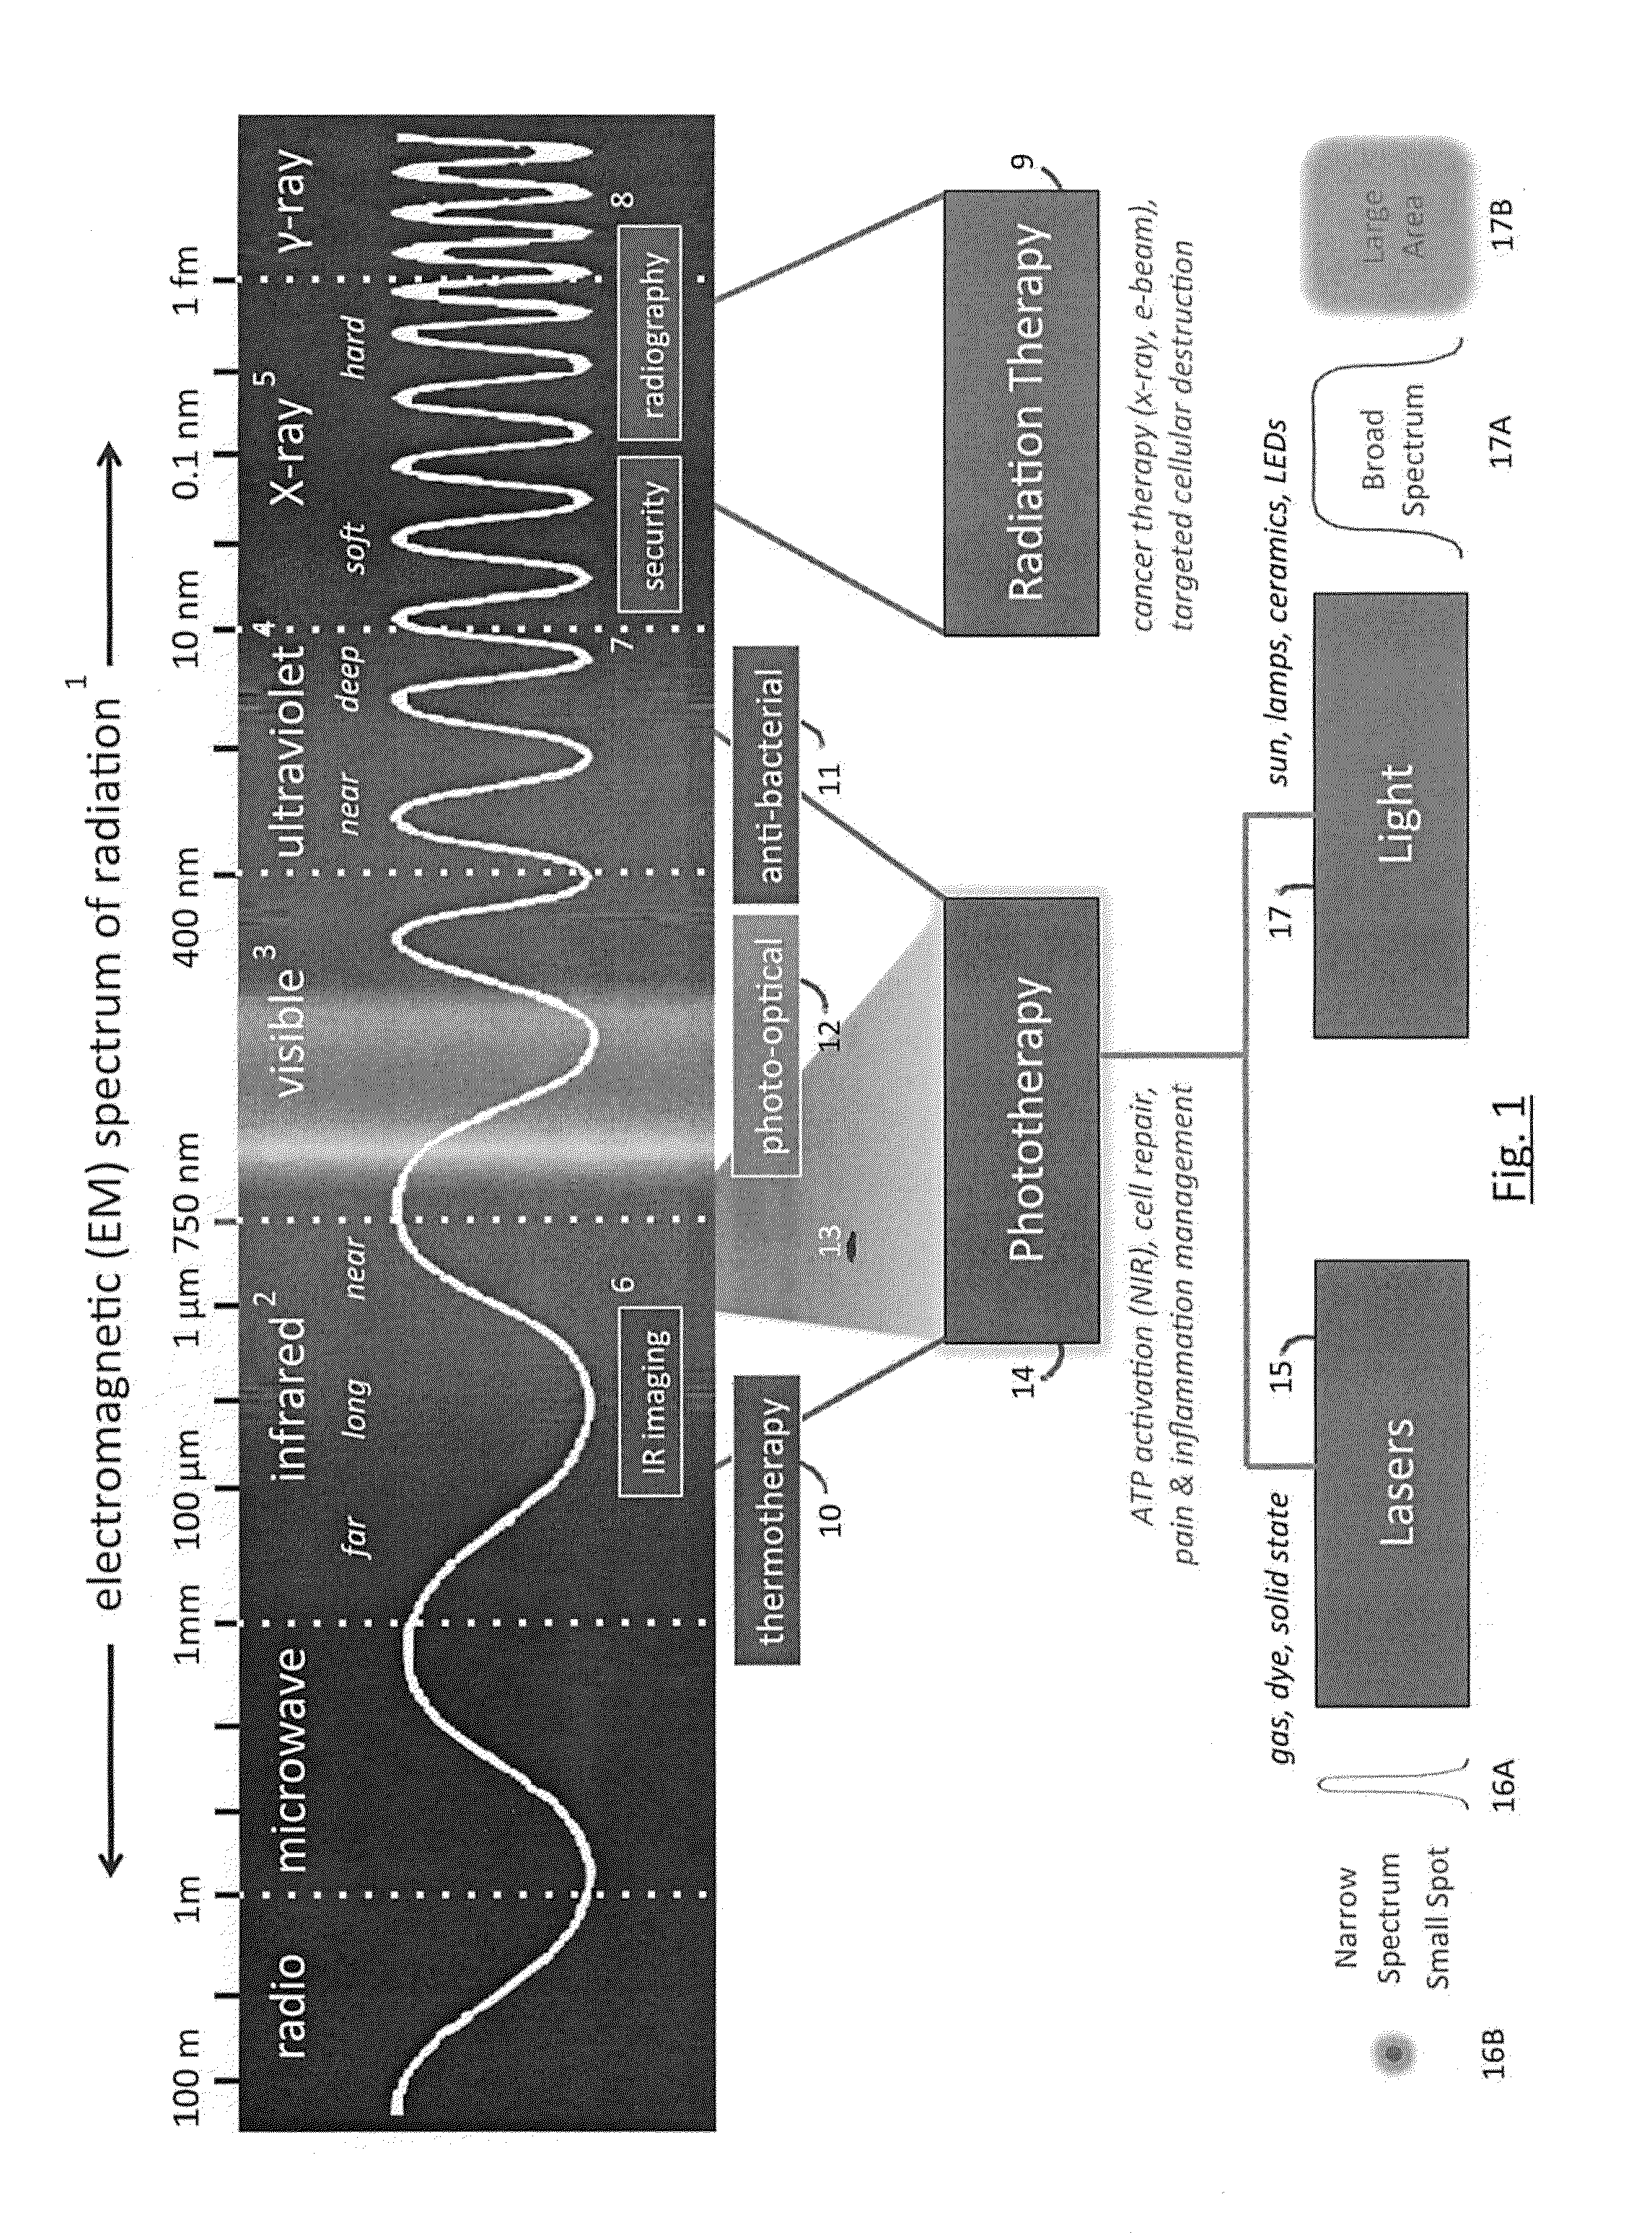 Phototherapy System And Process Including Dynamic LED Driver With Programmable Waveform